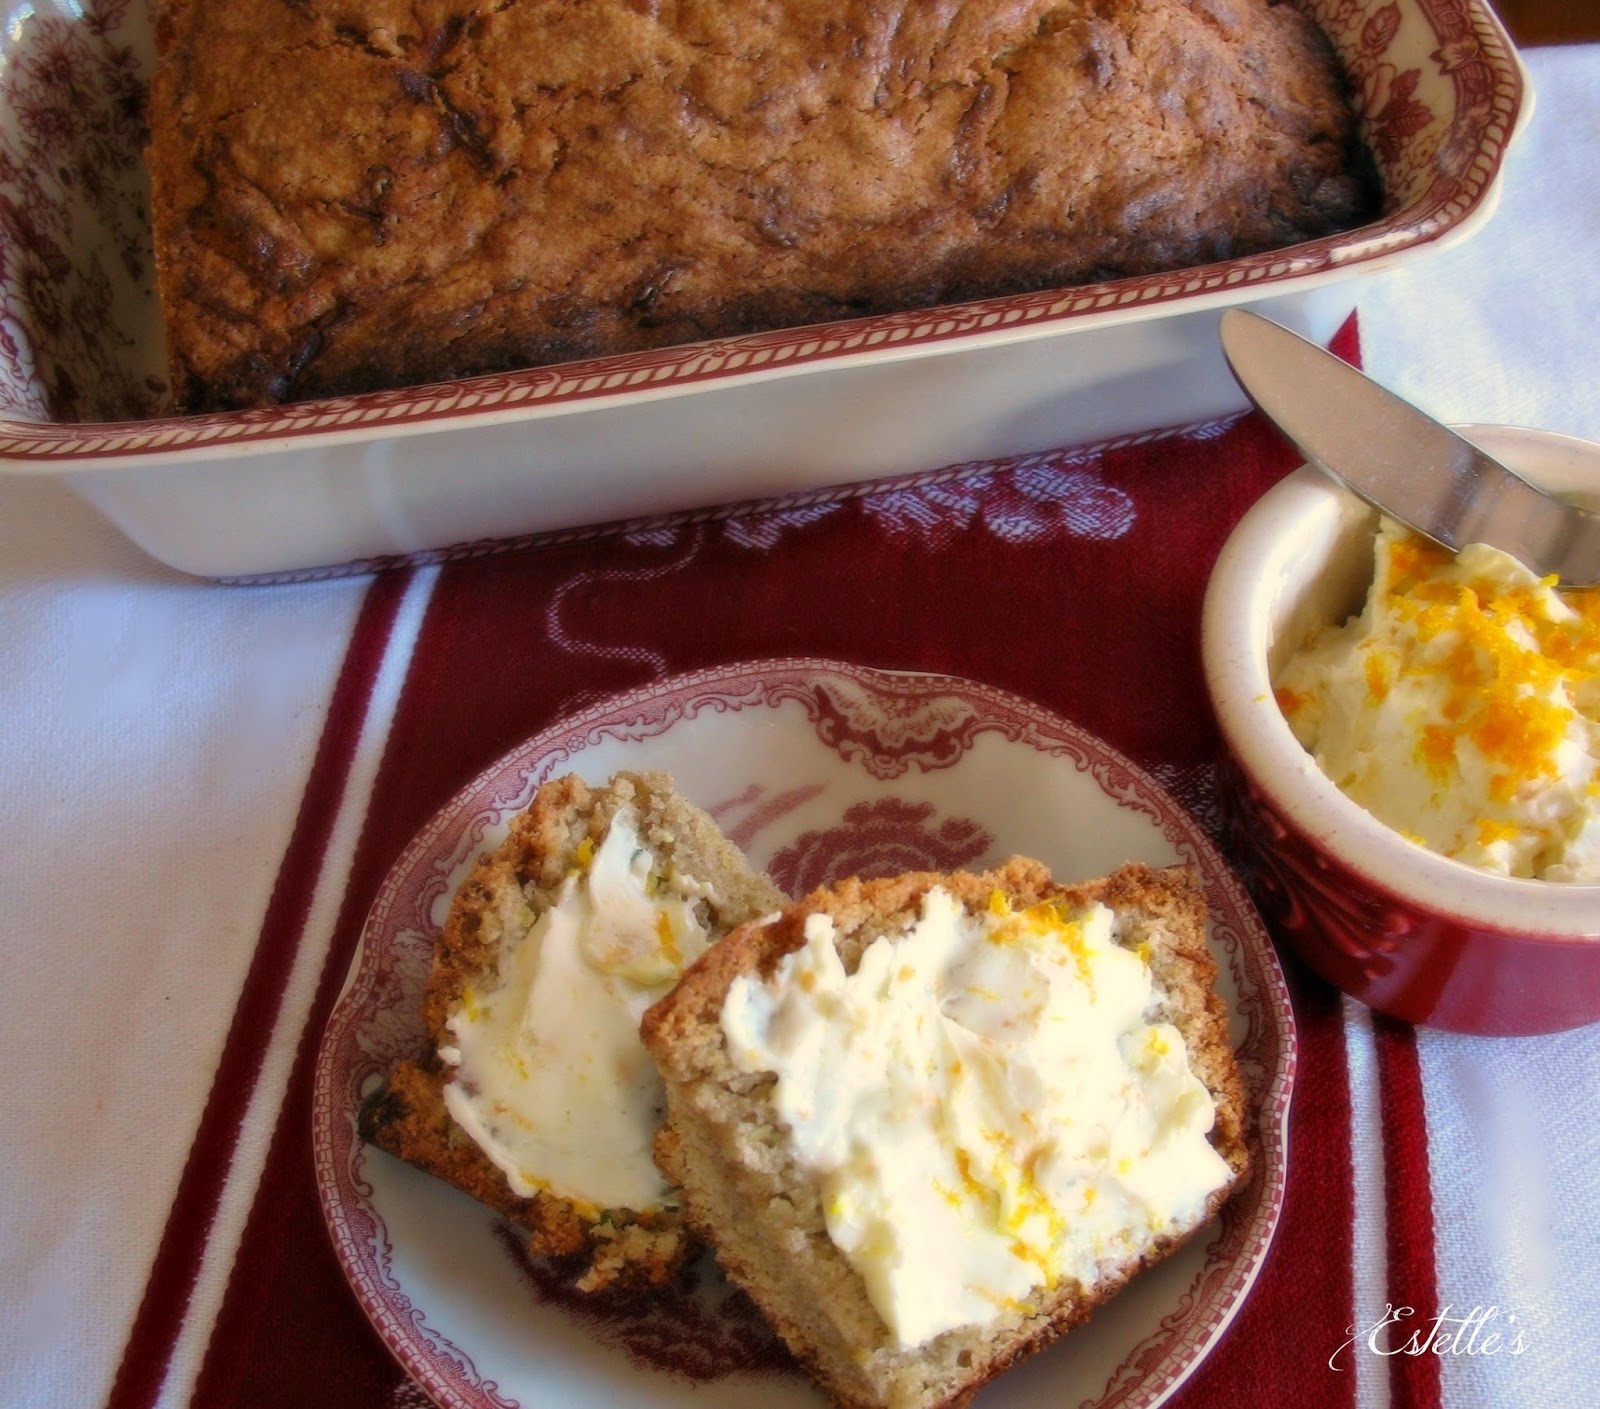 Estelle's ZUCCHINI BREAD FROM MISS MARY BOBO....A VISIT TO THE